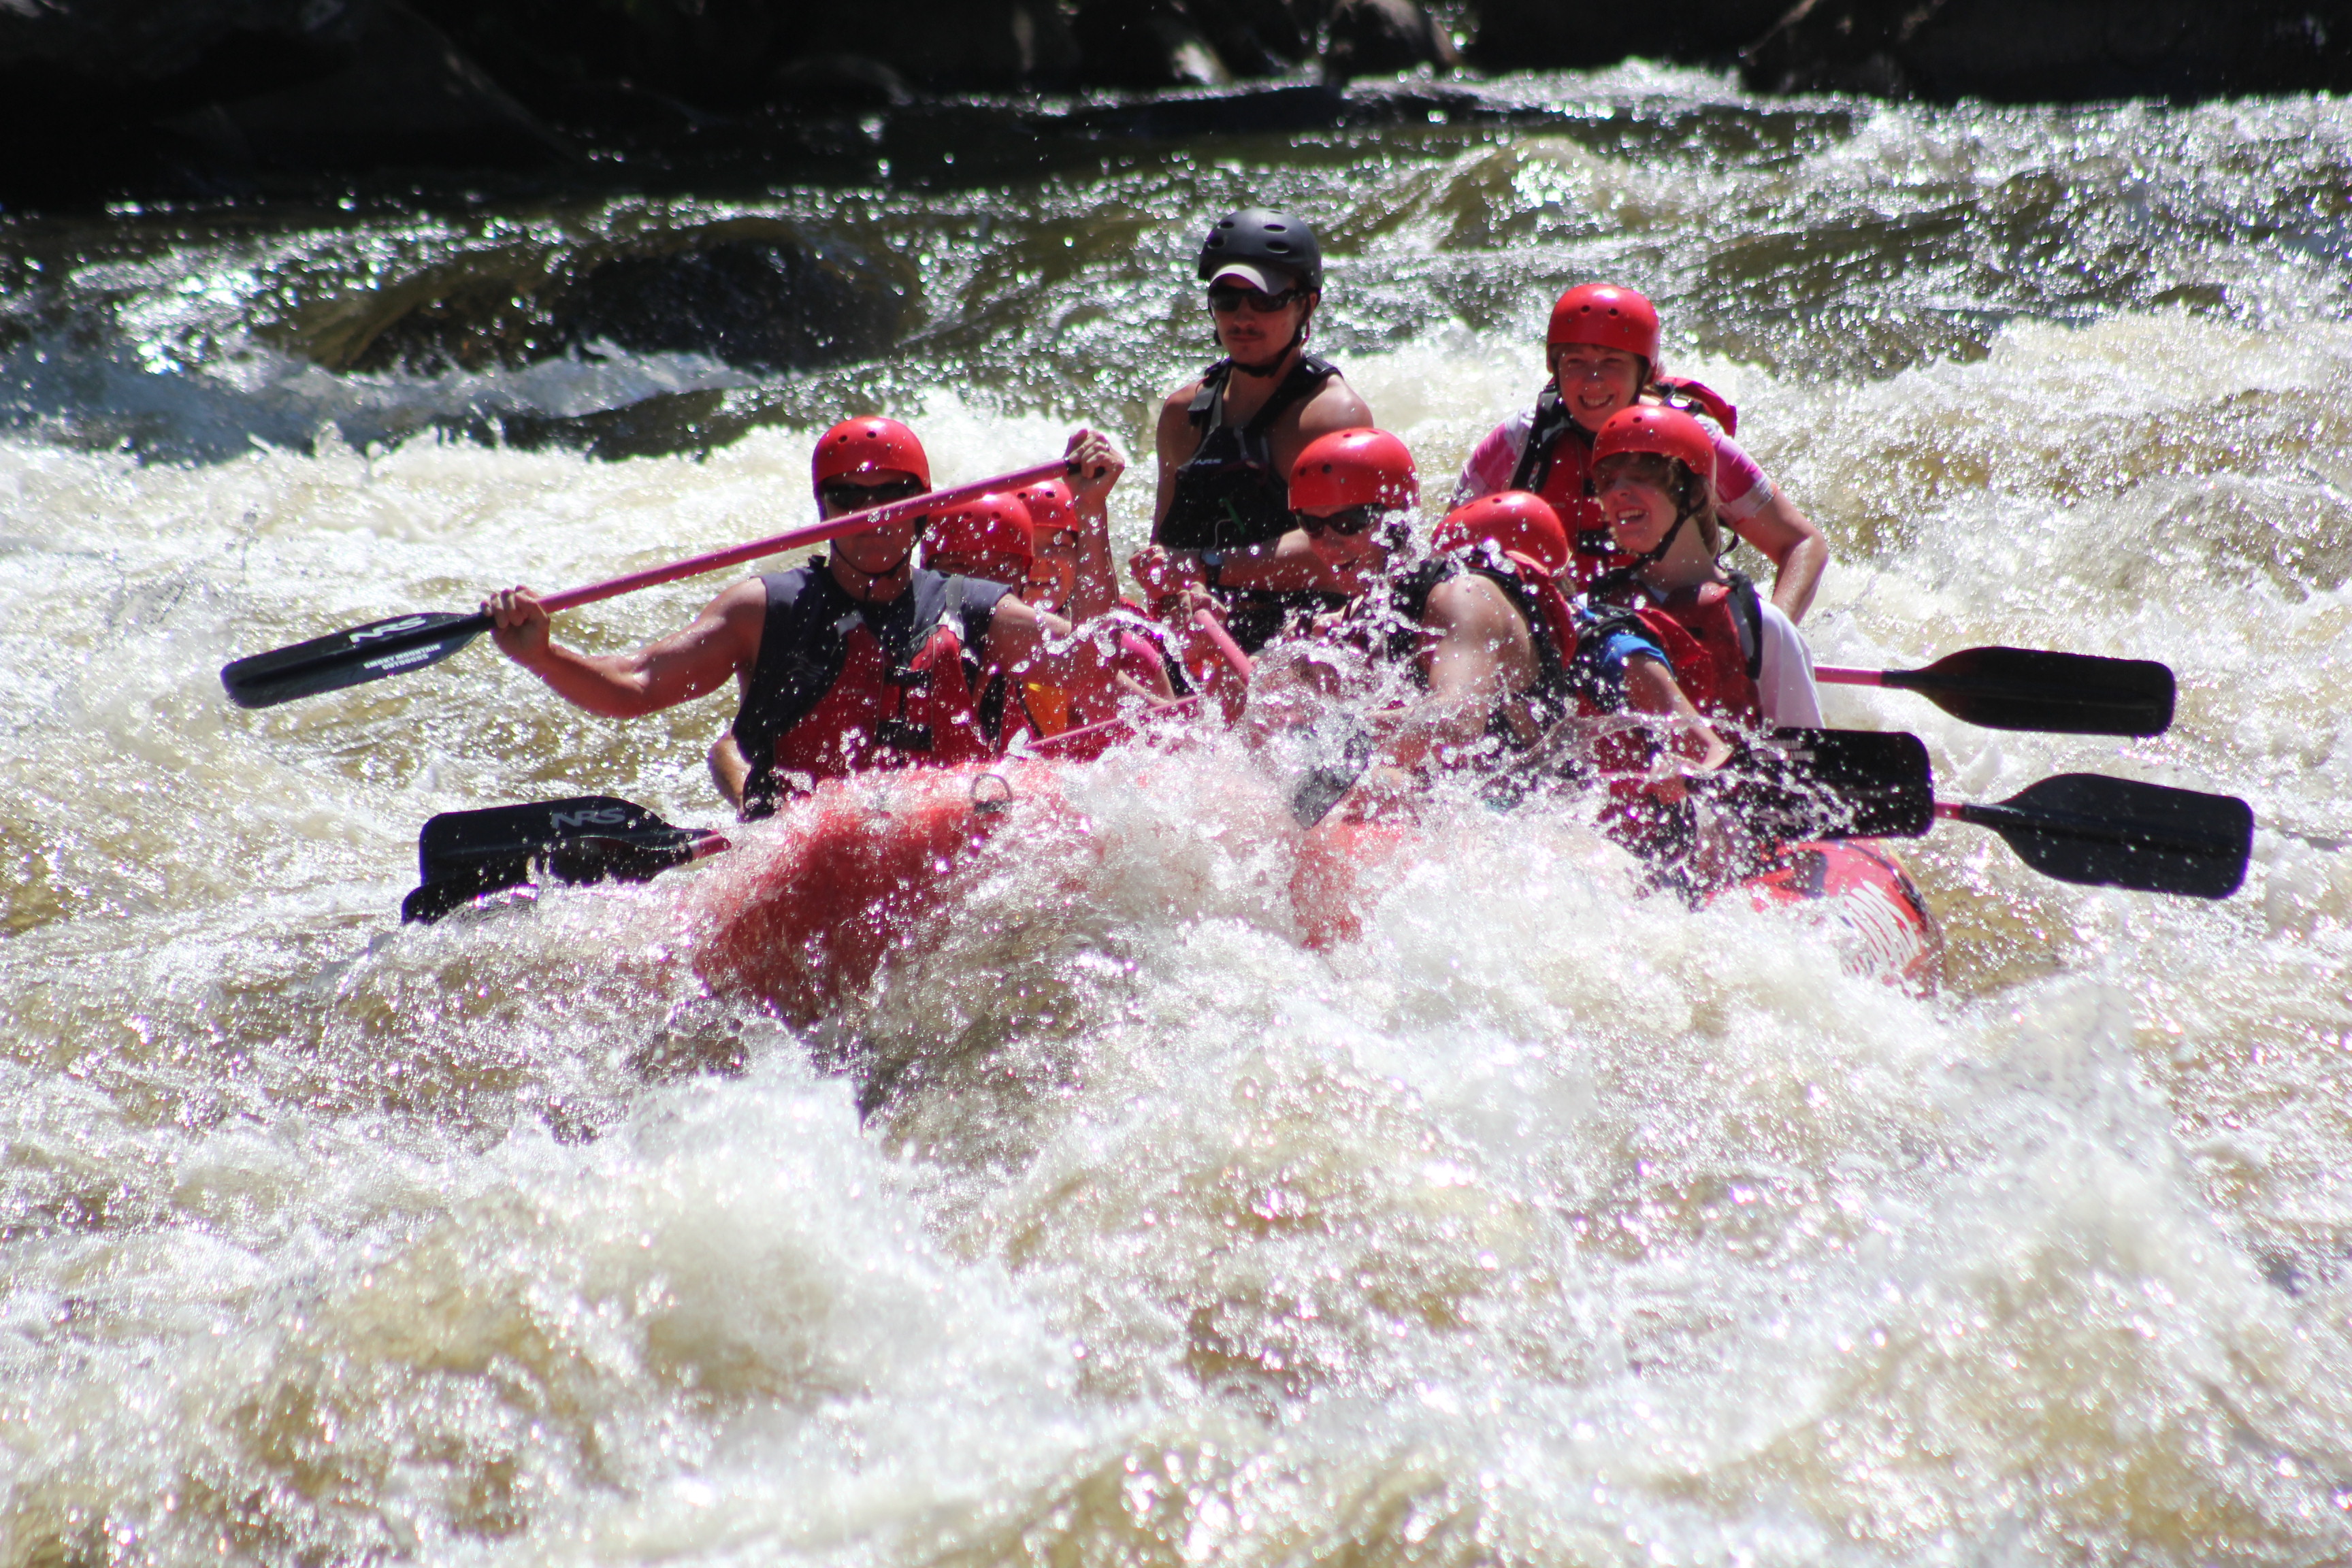 White water rafting in the Smoky mountains